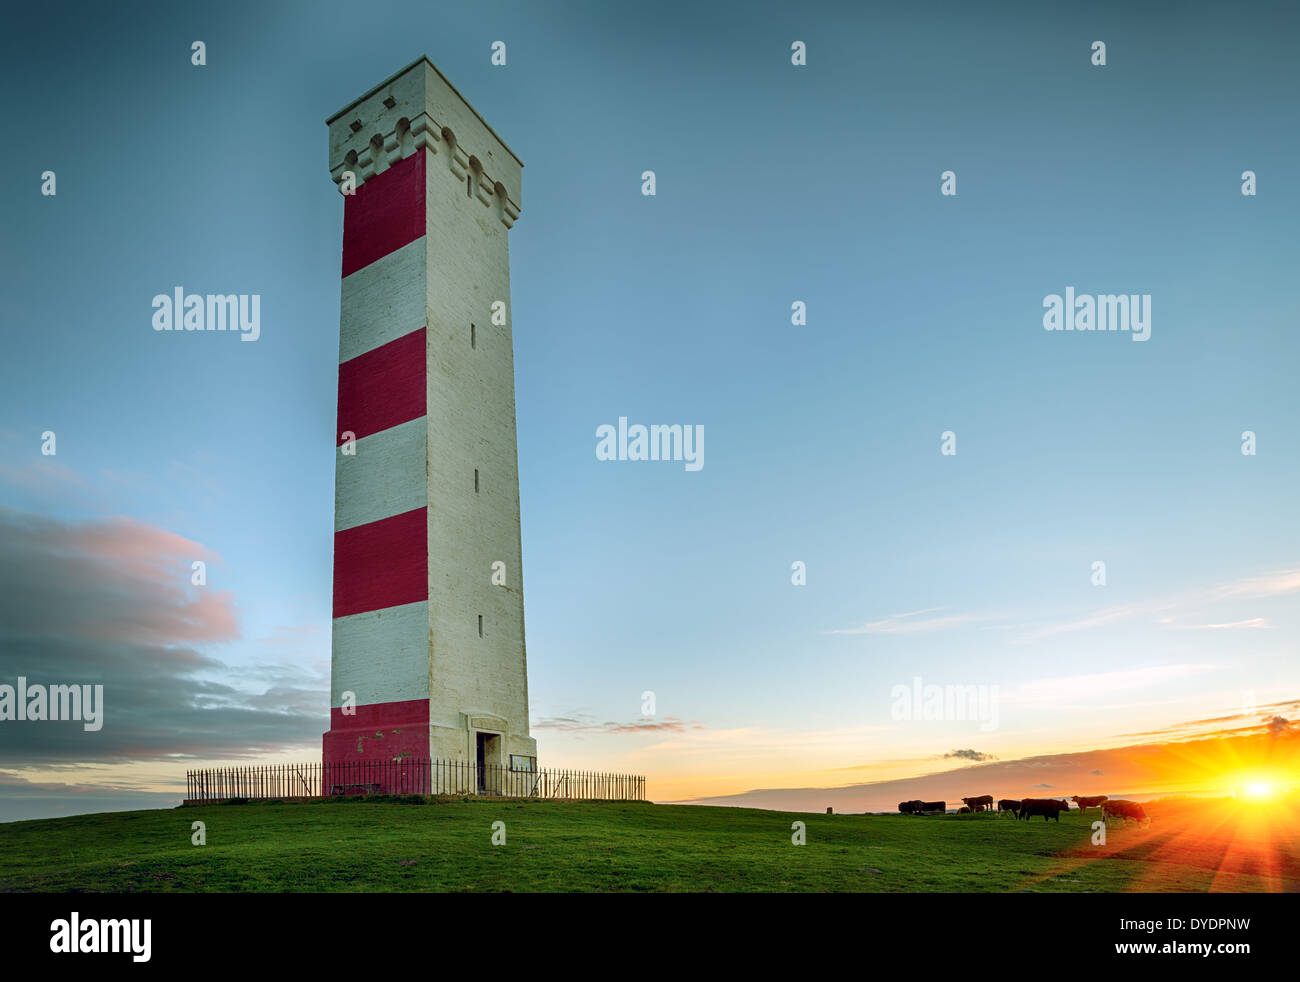 Sunset at the Gribbin Head lighthouse in Cornwall Stock Photo